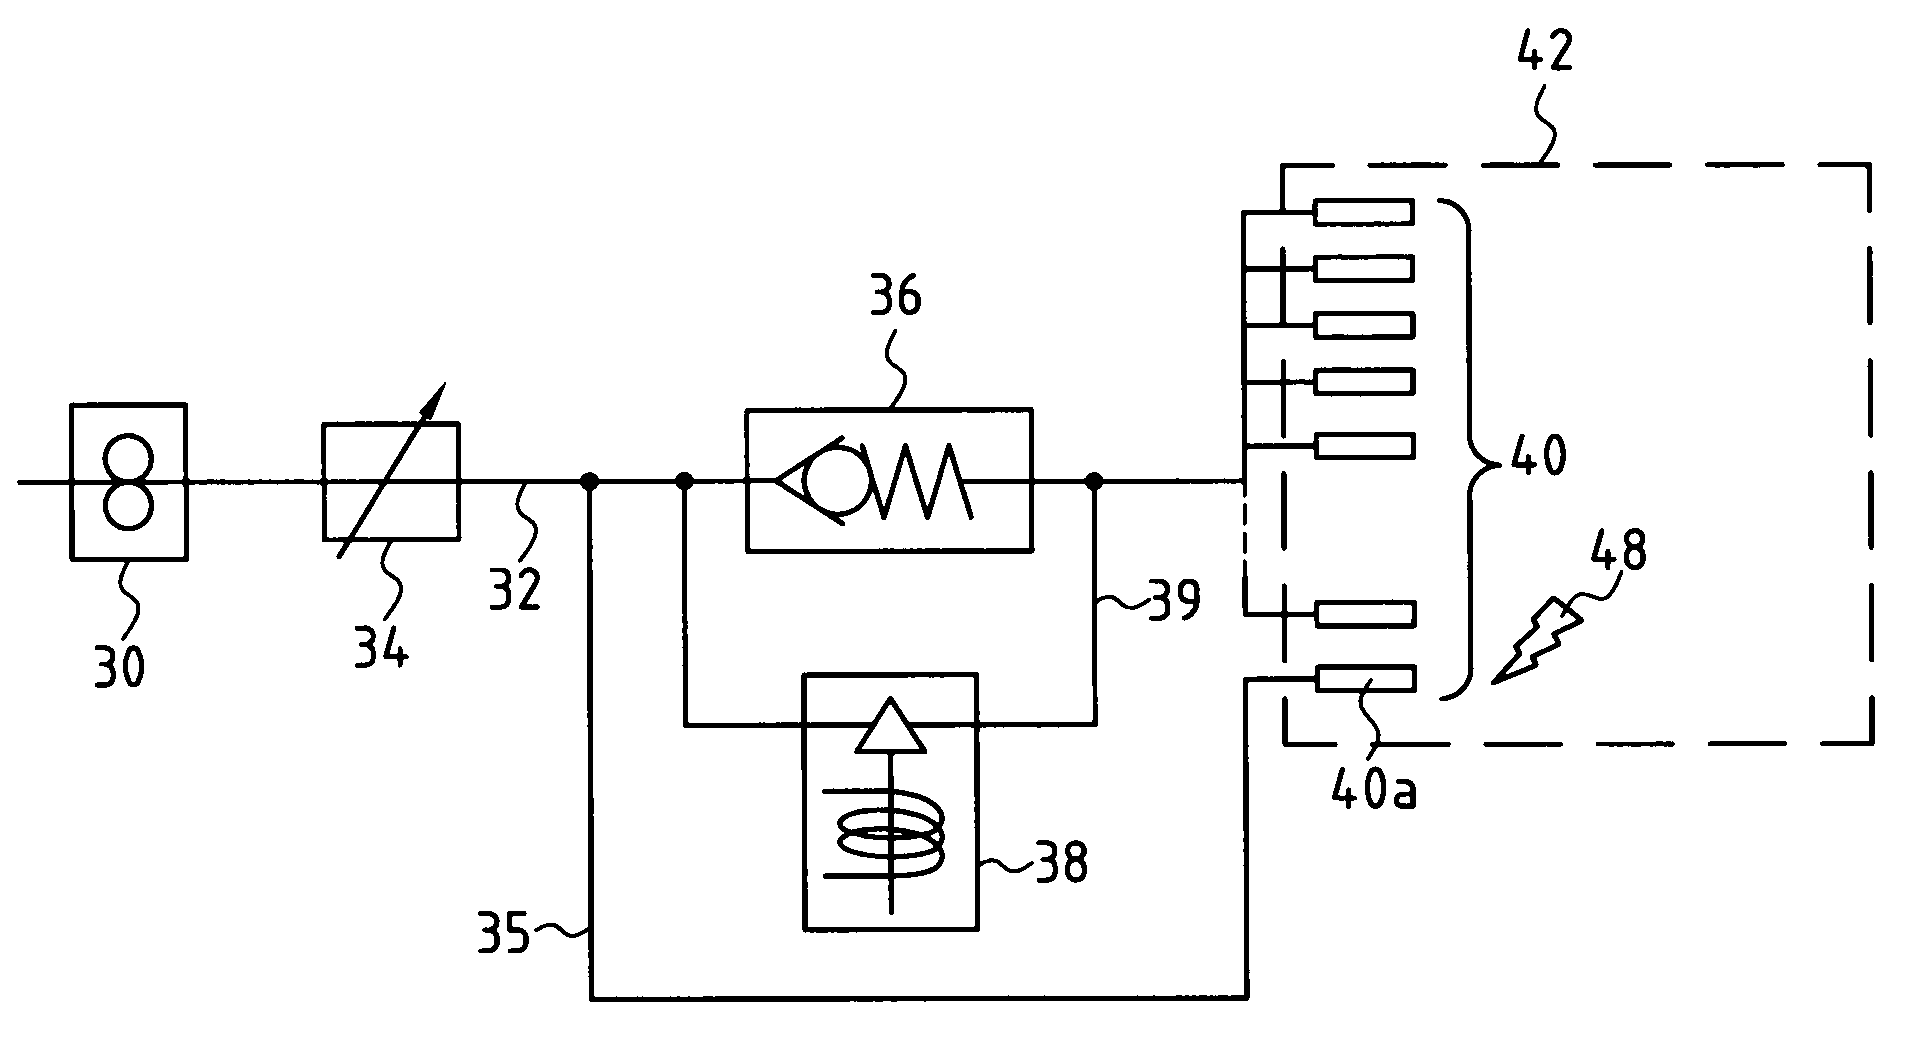 Method of starting a gas turbine helicopter engine, a fuel feed circuit for such an engine, and an engine having such a circuit